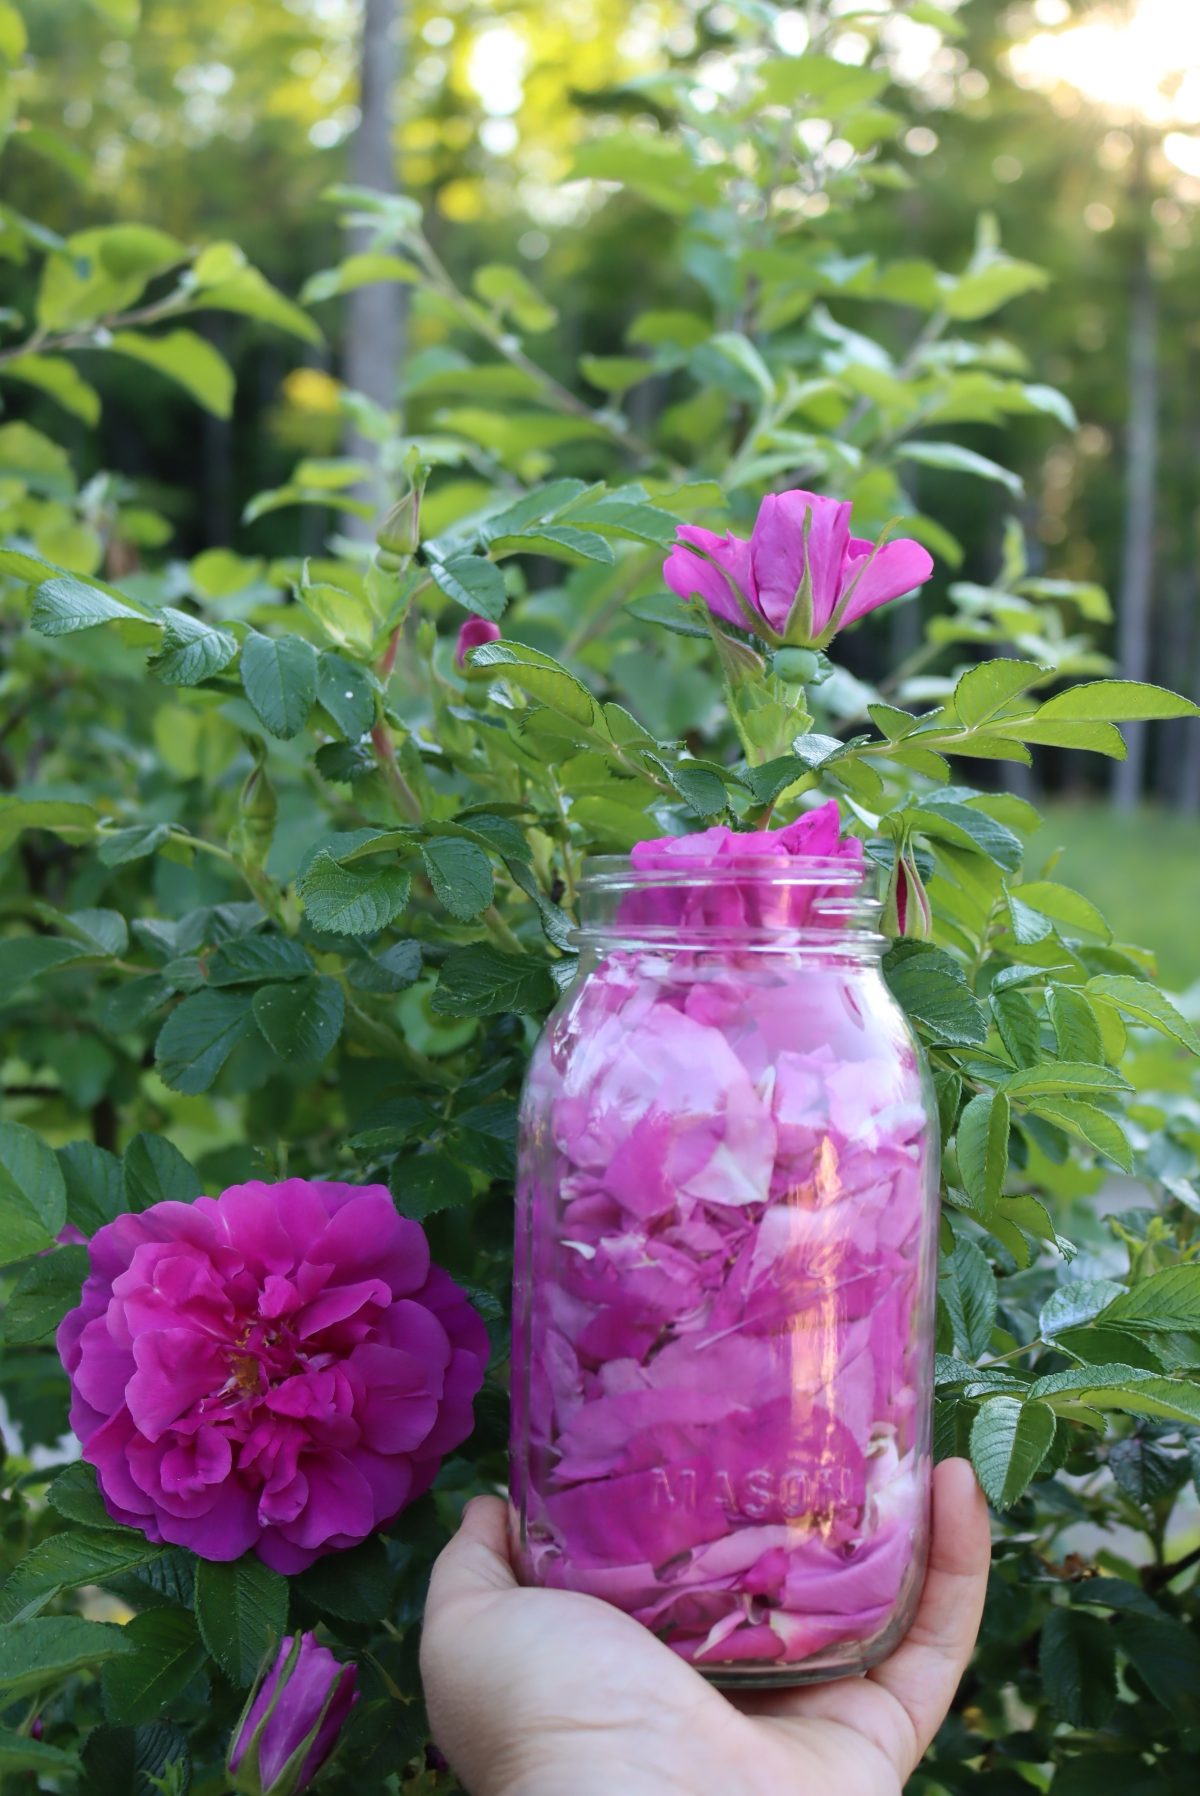 Harvesting petals for rose jelly